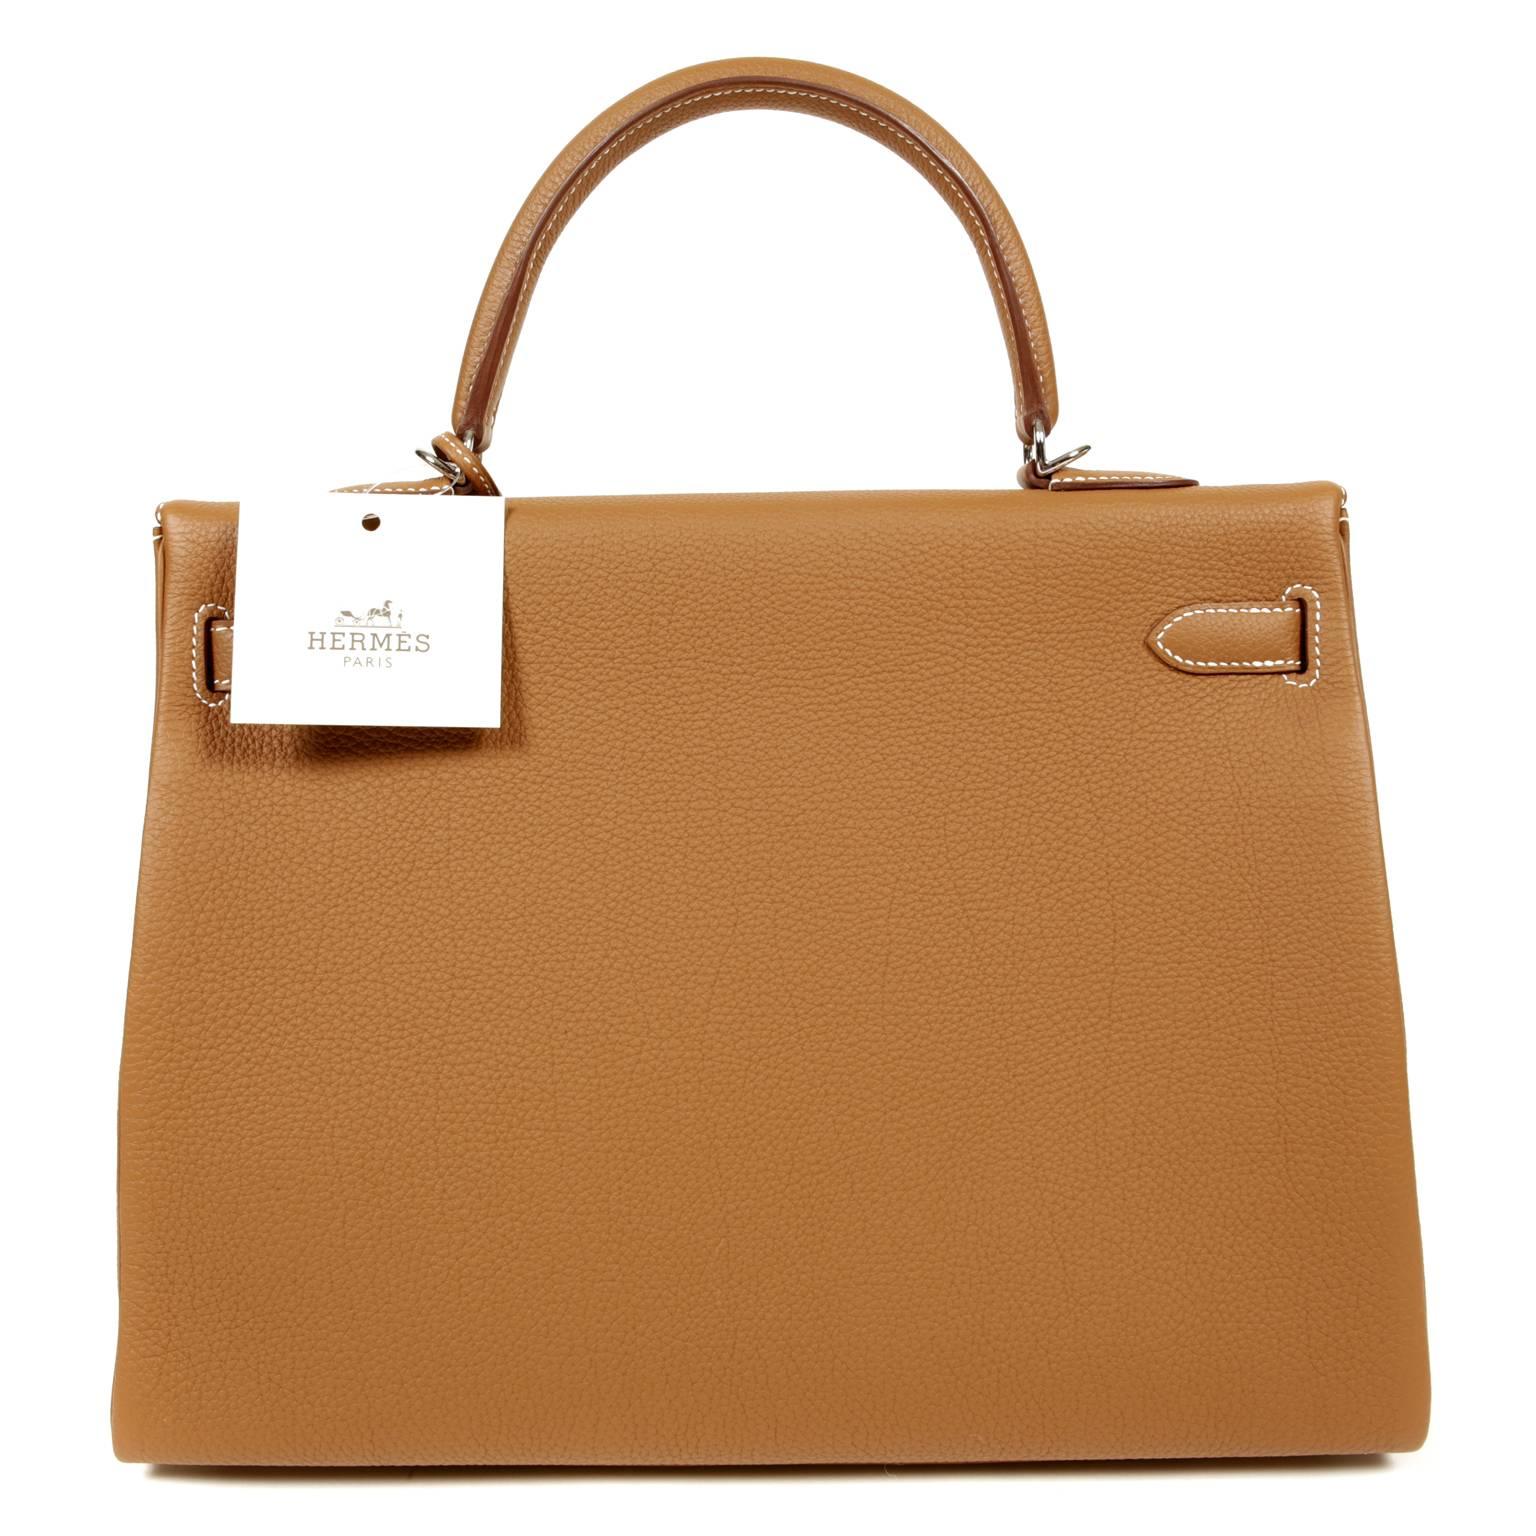 Hermès Gold Togo Leather 35 cm Kelly-  PRISTINE, Never Carried
The protective plastic is intact on all the hardware.    Considered the ultimate luxury item worldwide, each Hermès bag is handcrafted by skilled artisans.  Waitlists are often in